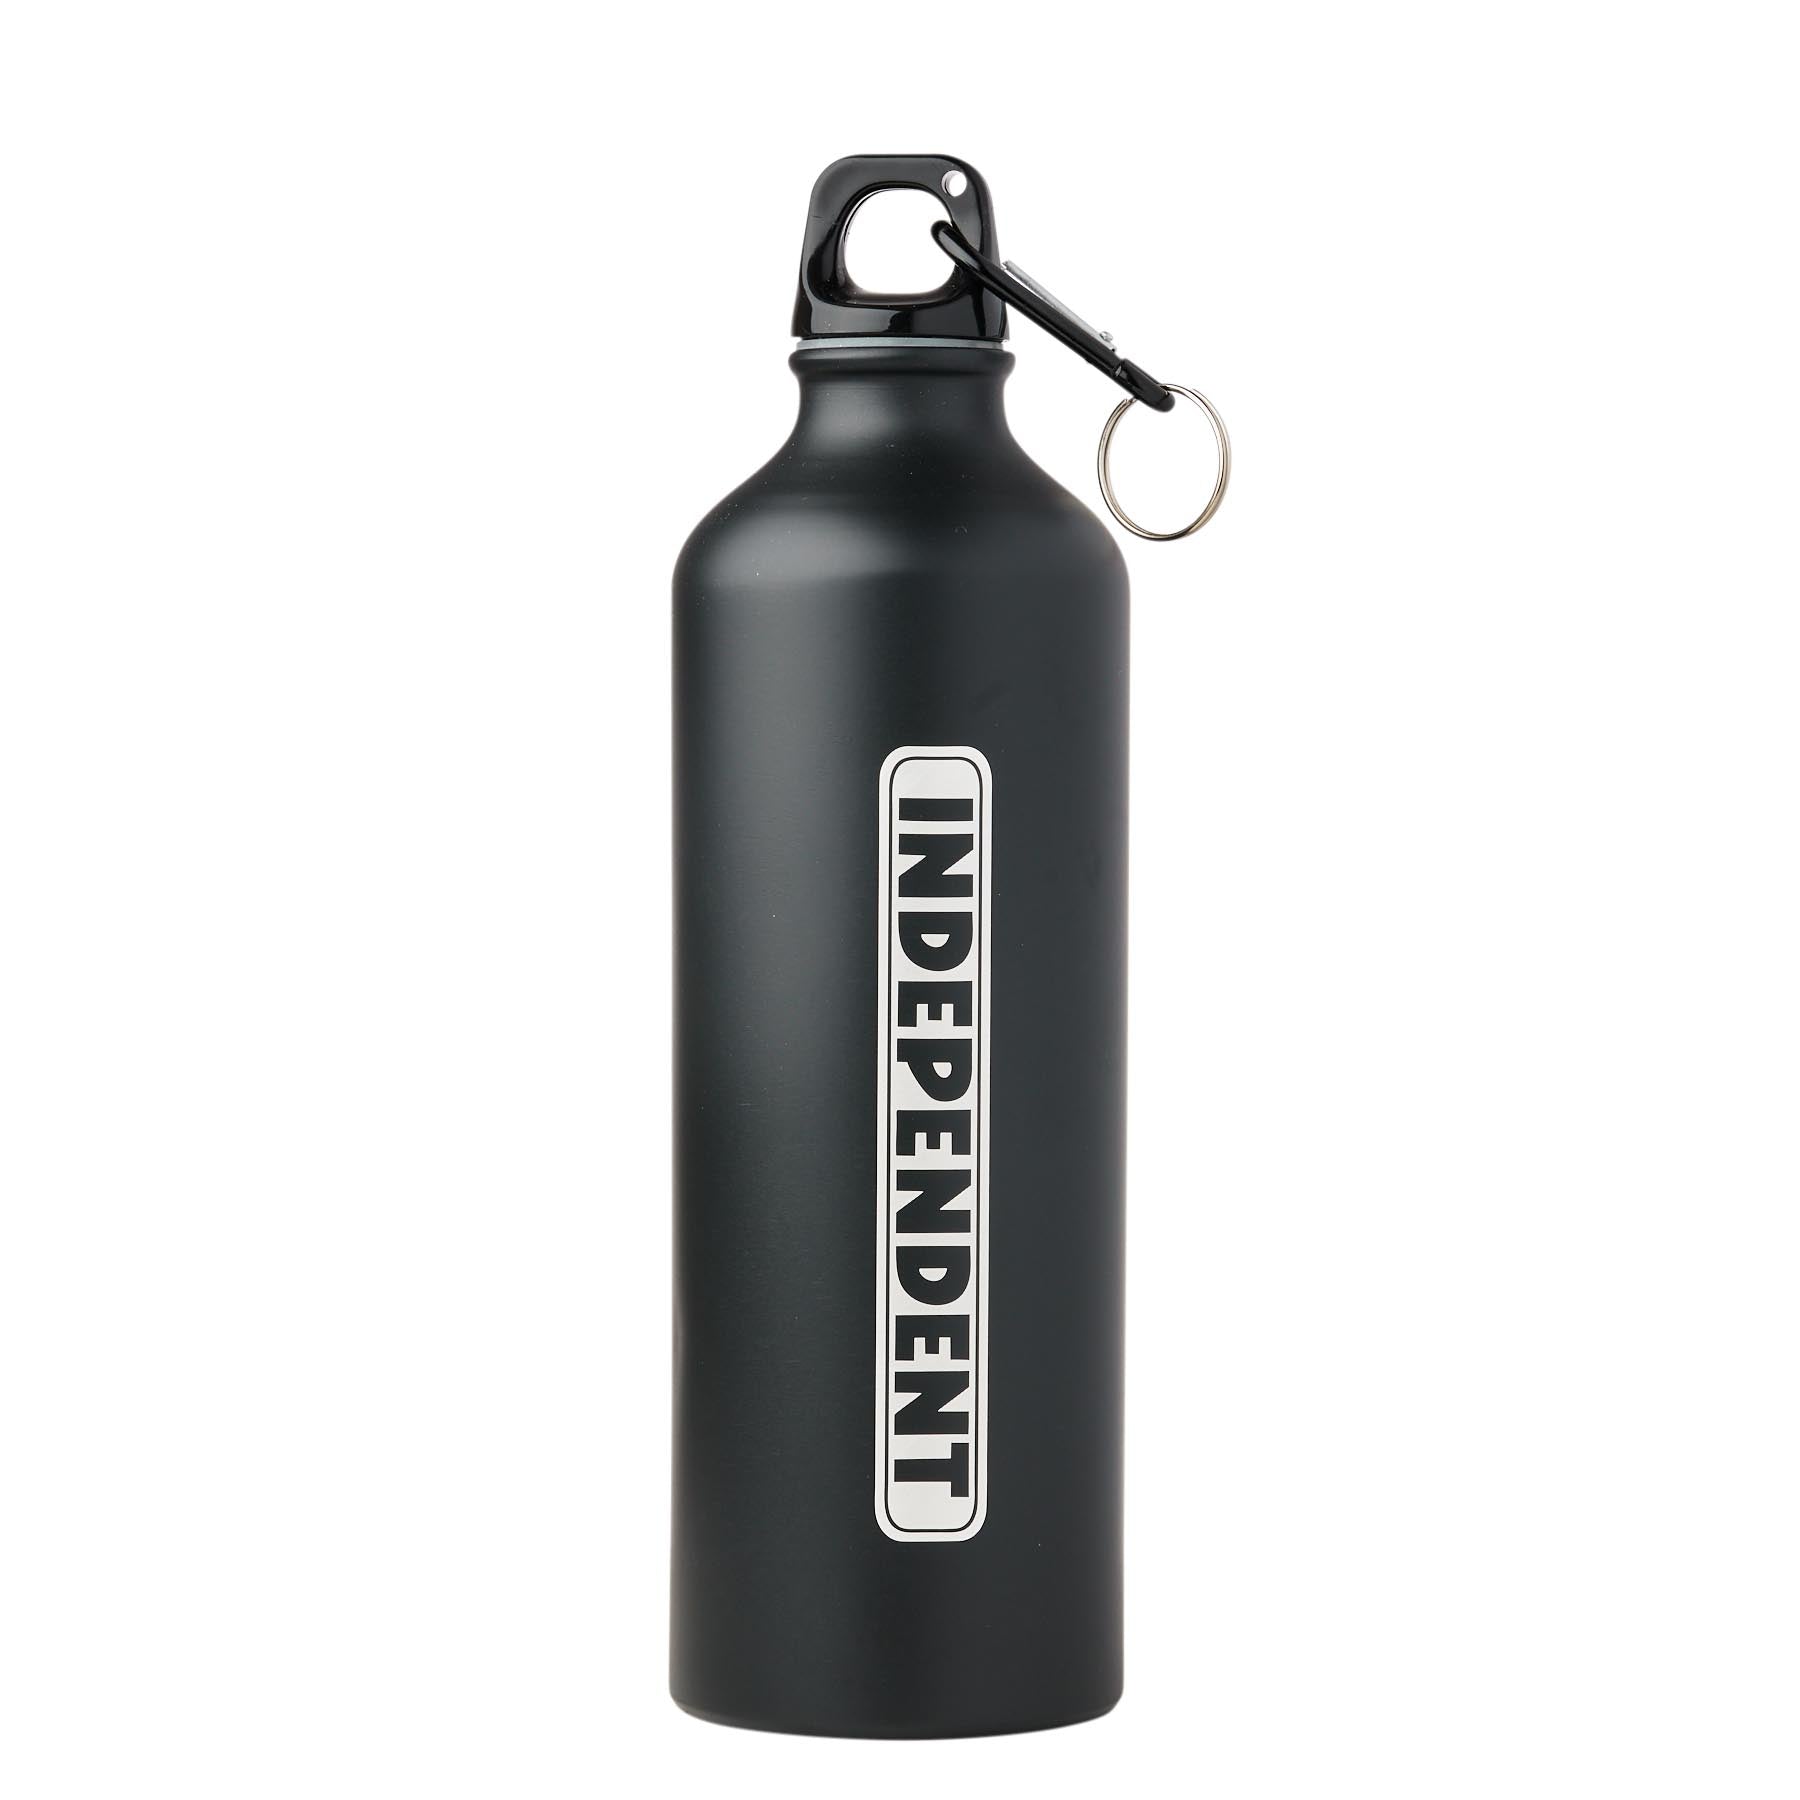 Independent water bottle